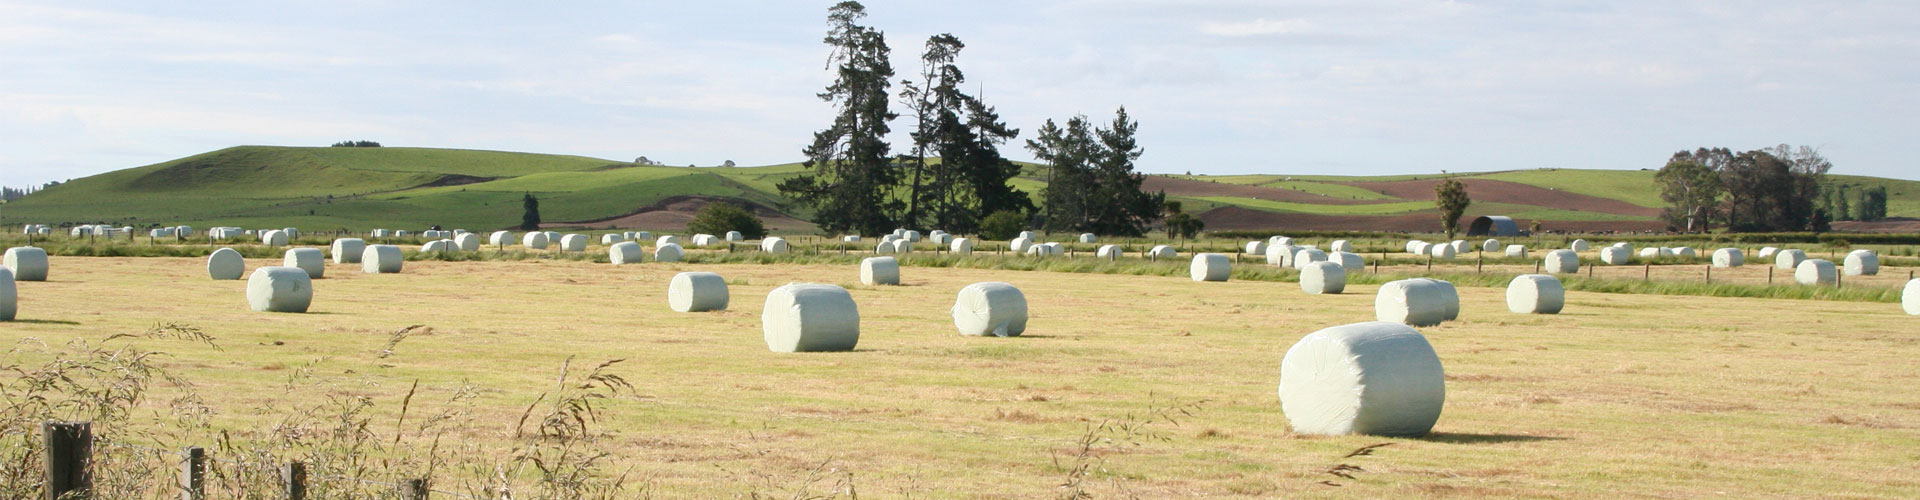 The 5 star wrapping film for silage bales